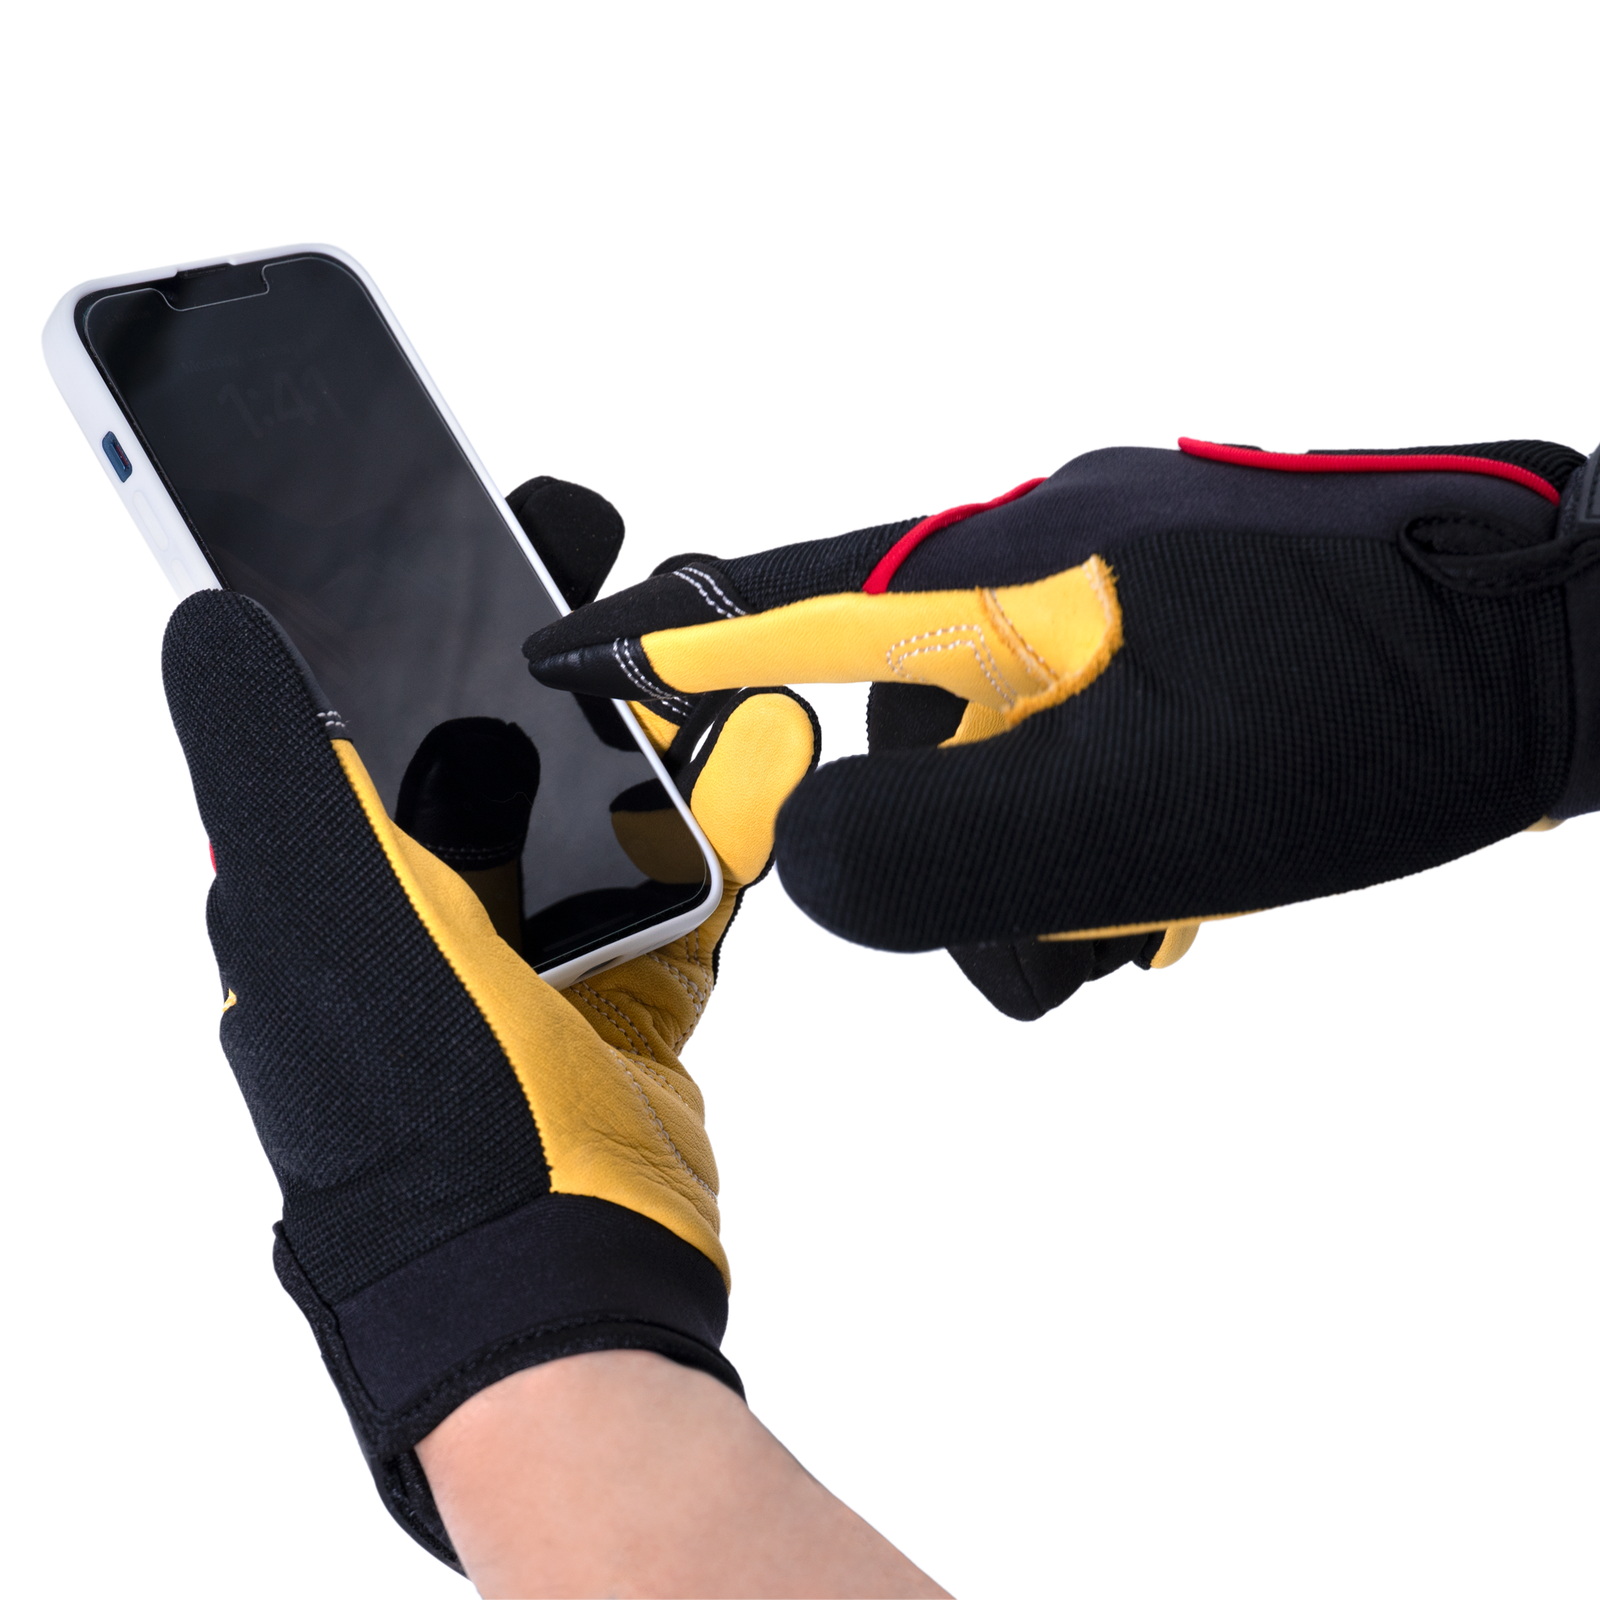 Touchscreen Safety Work Gloves with Leather Palms